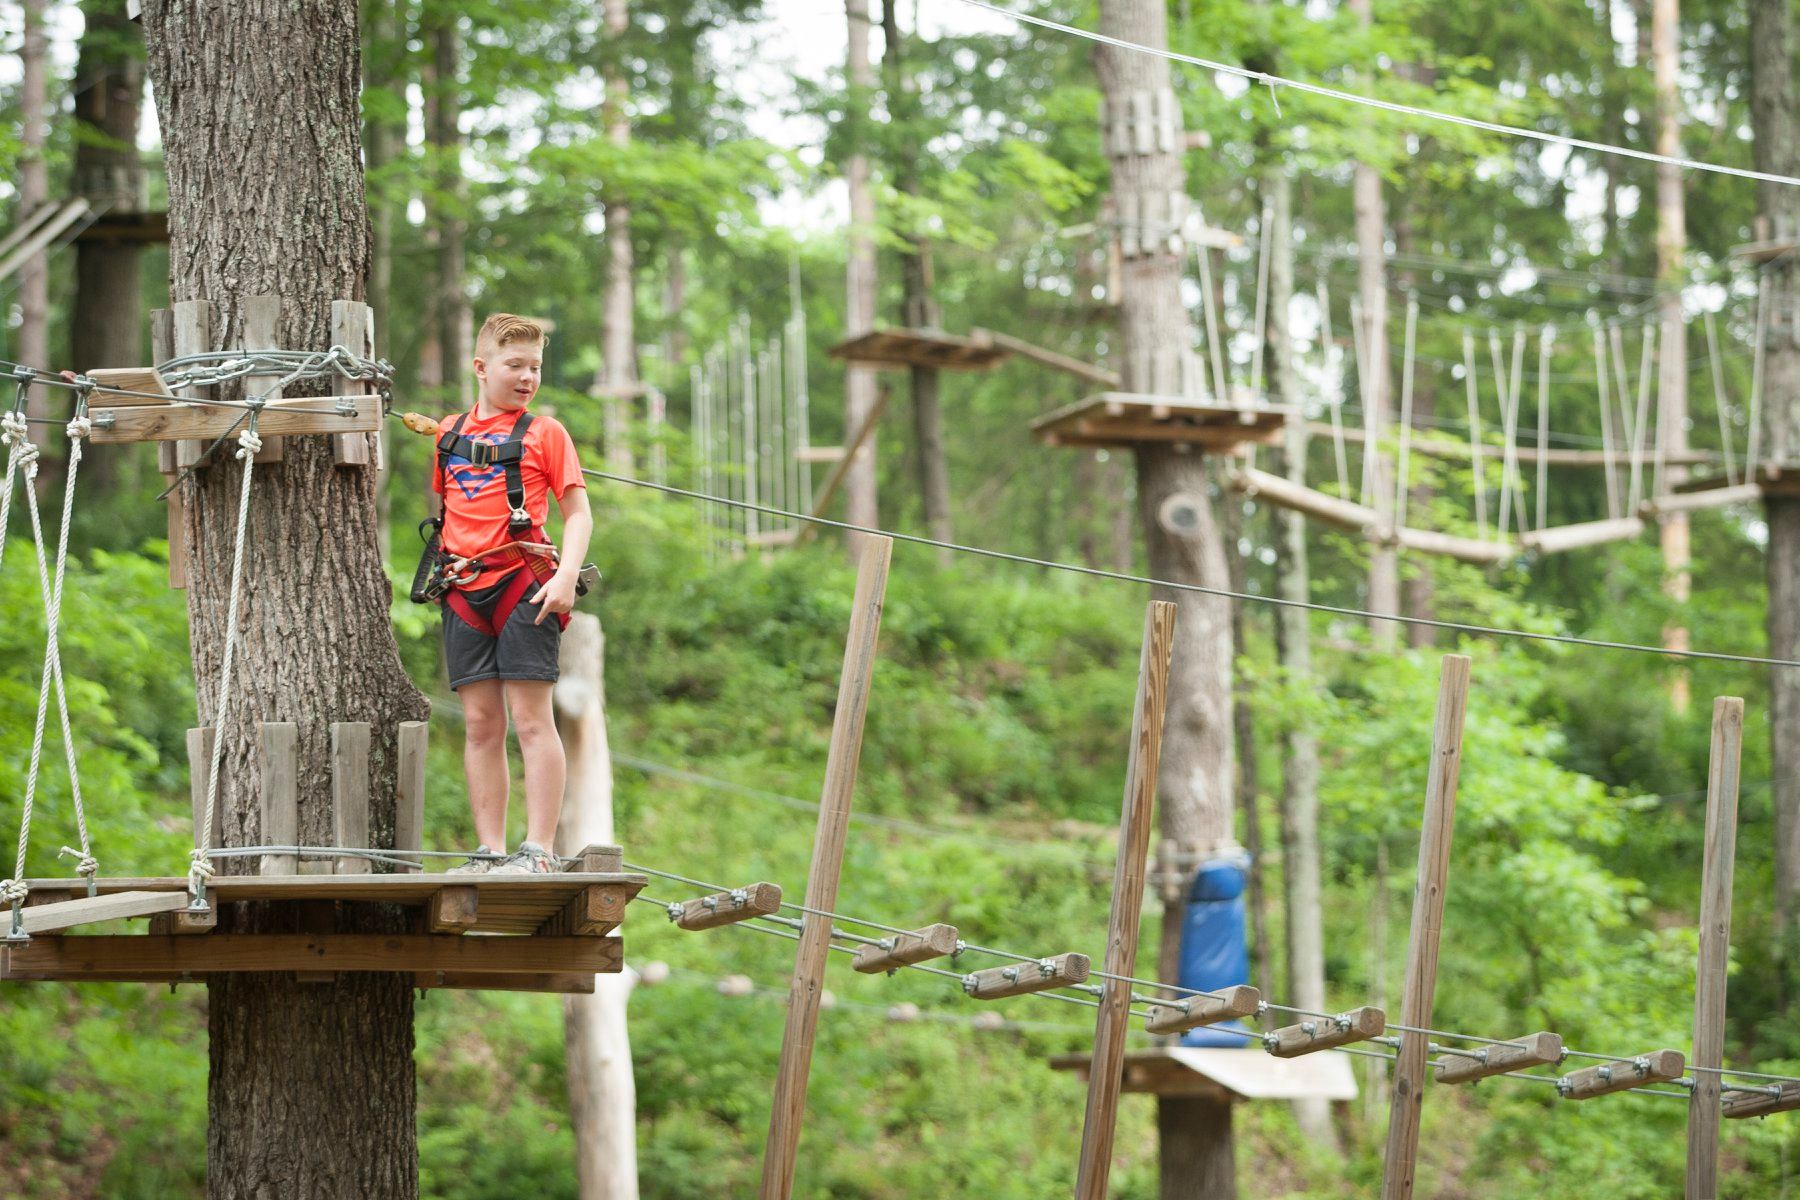 Children partaking in the tree rush ropes course